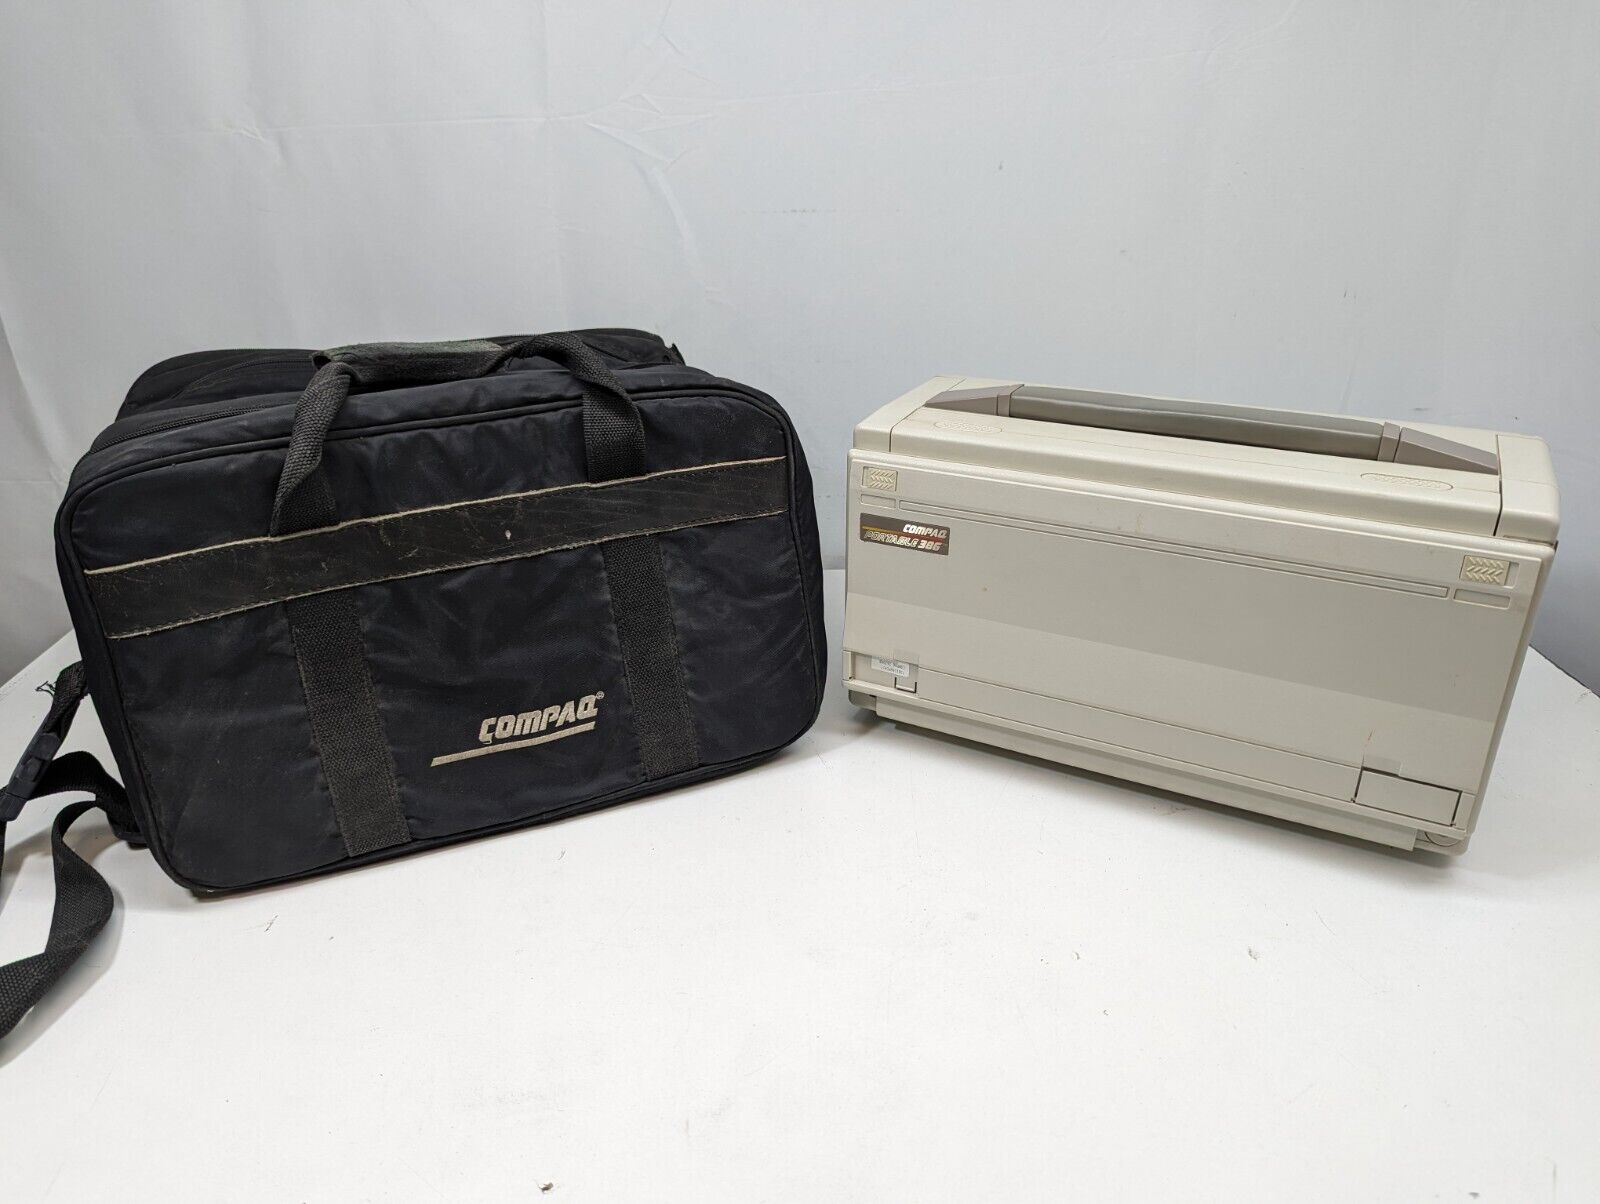 Compaq 386 Portable Computer Model 2670 - Powers On and Displays Out to Screen